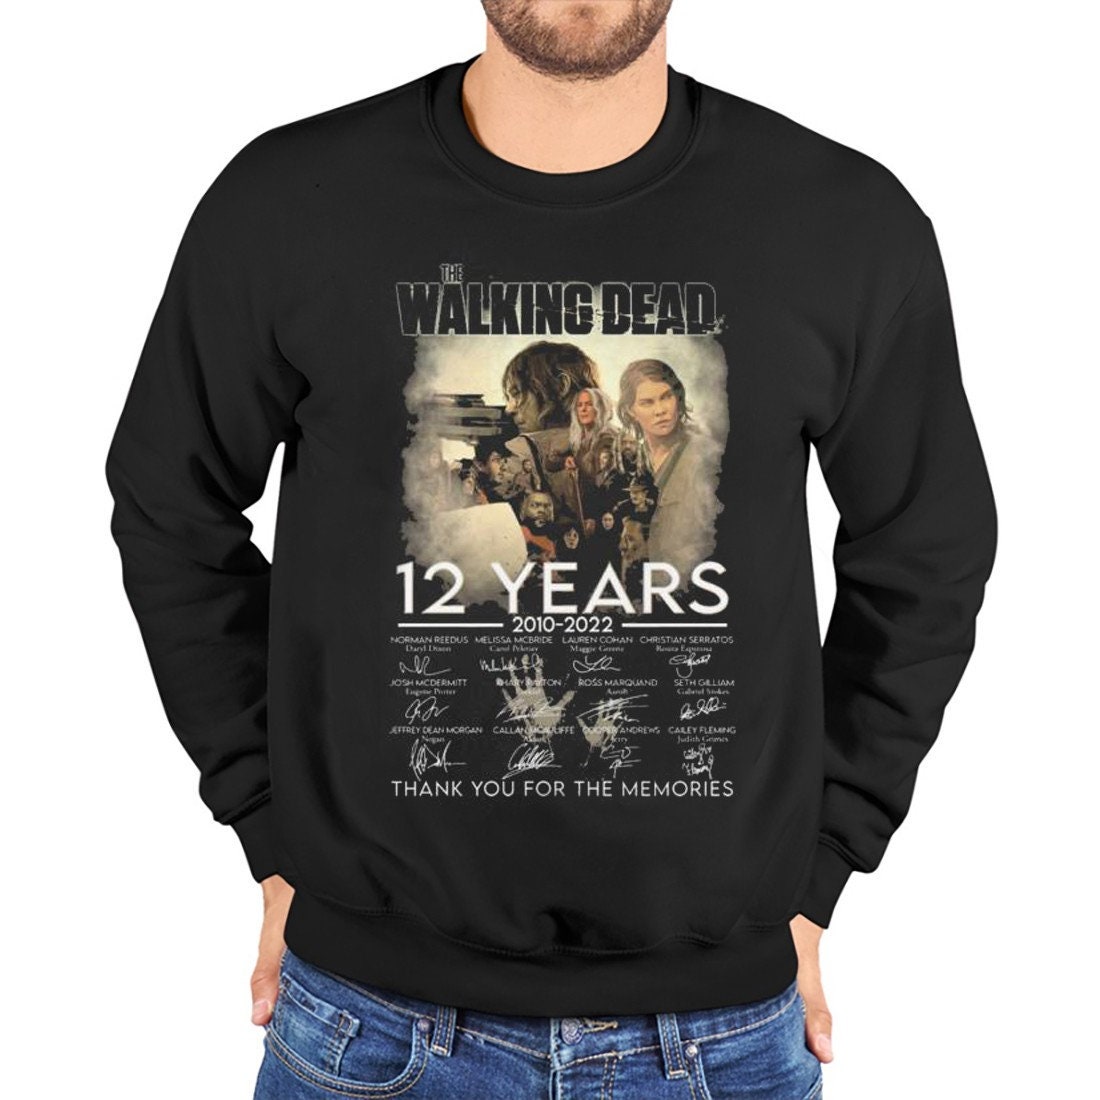 2010-2022 12 Years The Walking Dead Signatures Thank You For The Memories Unisex Sweatshirt